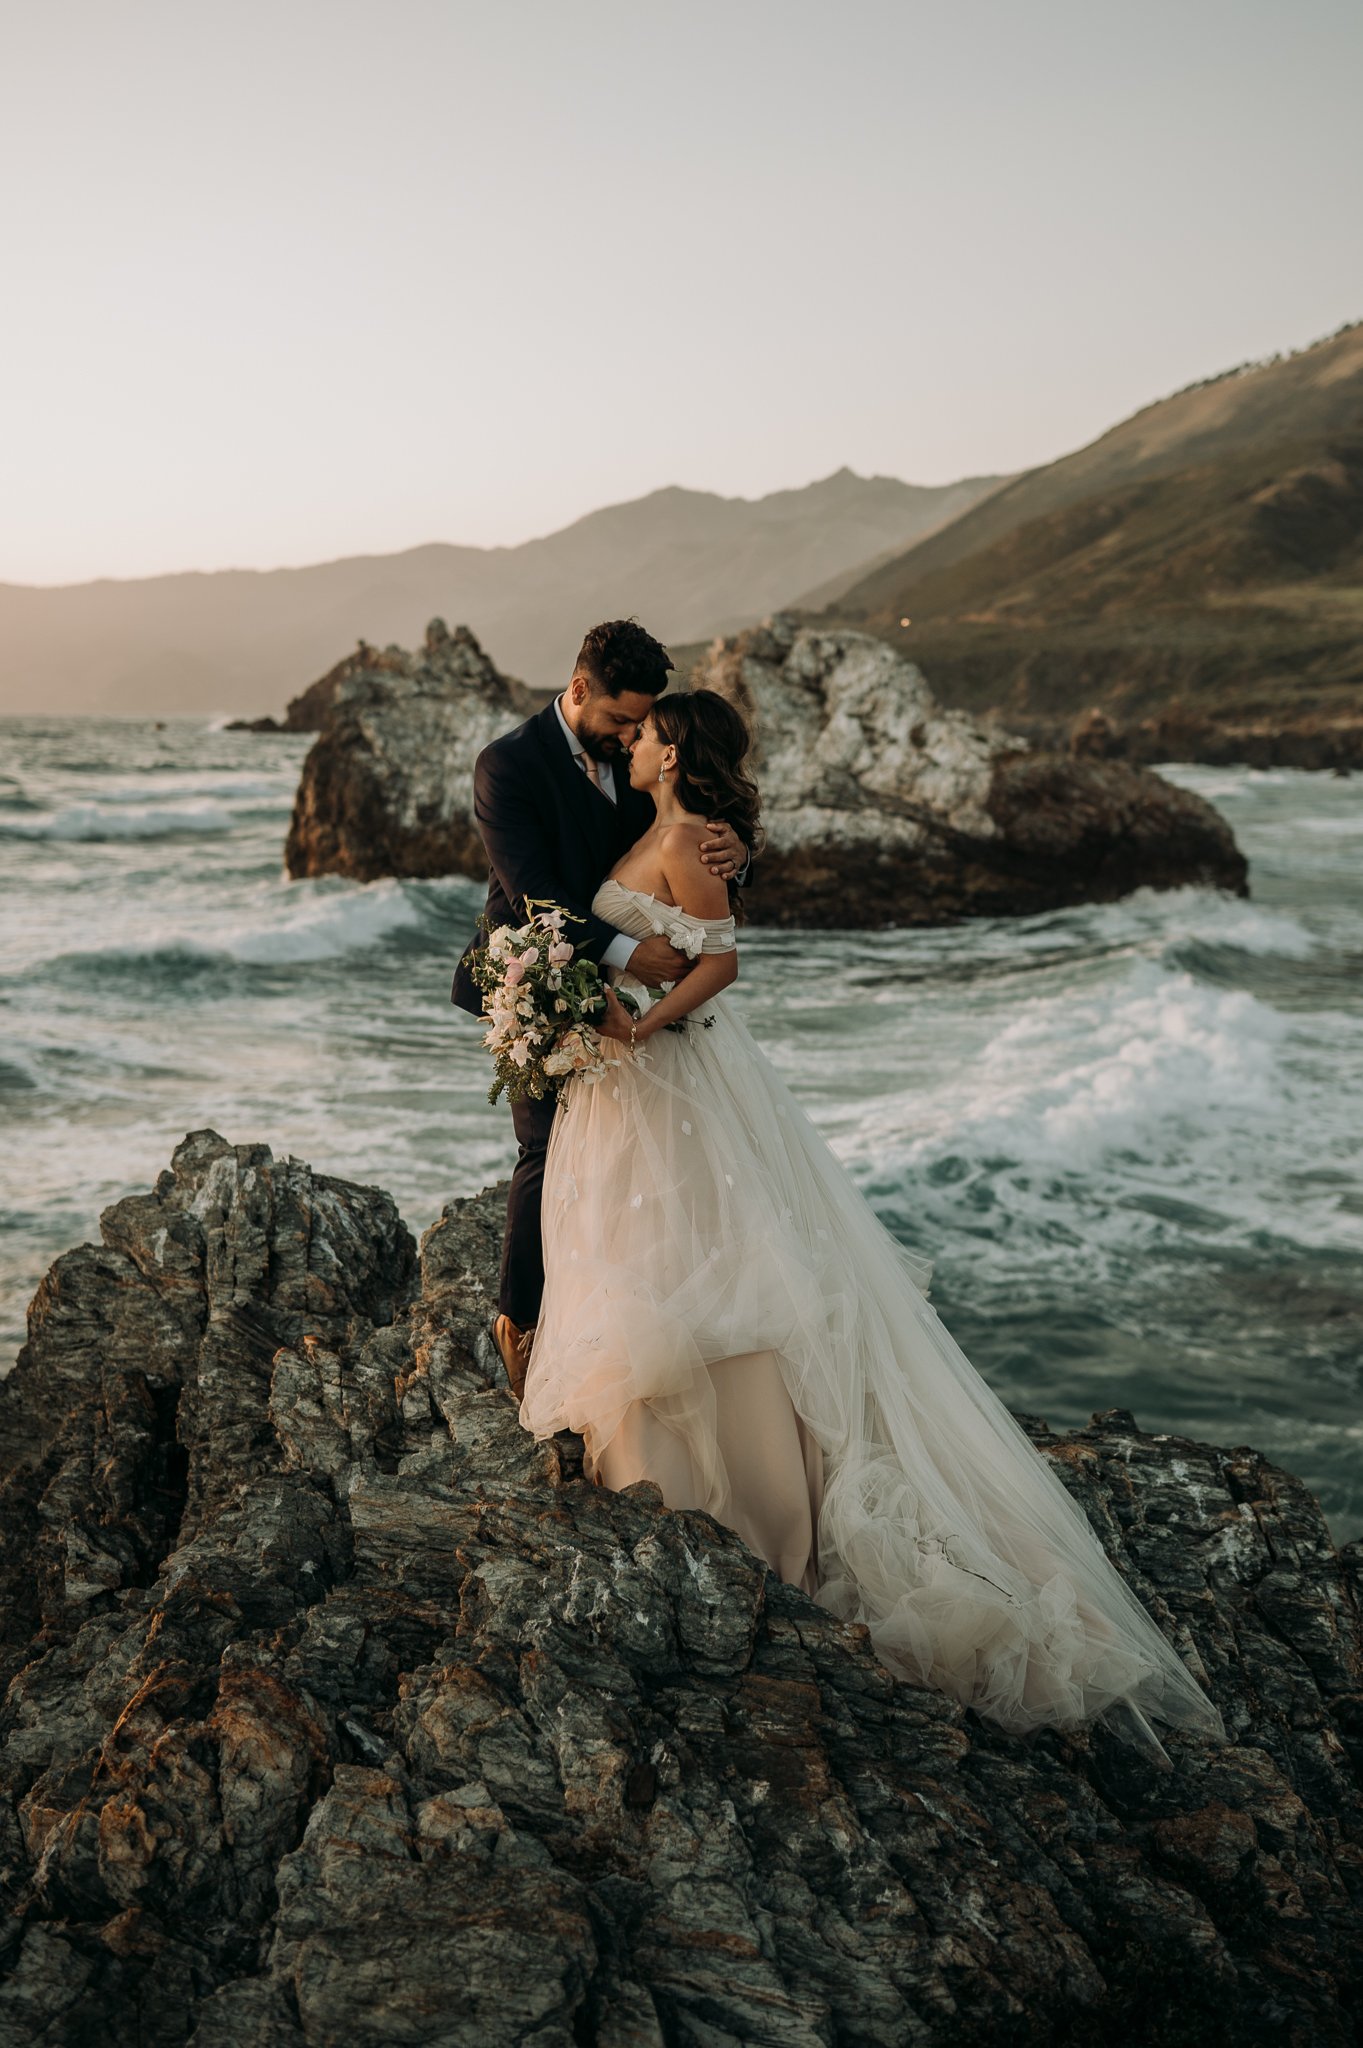 Newly married couple in wedding attire sharing a intimate moment on cliff Big Sur